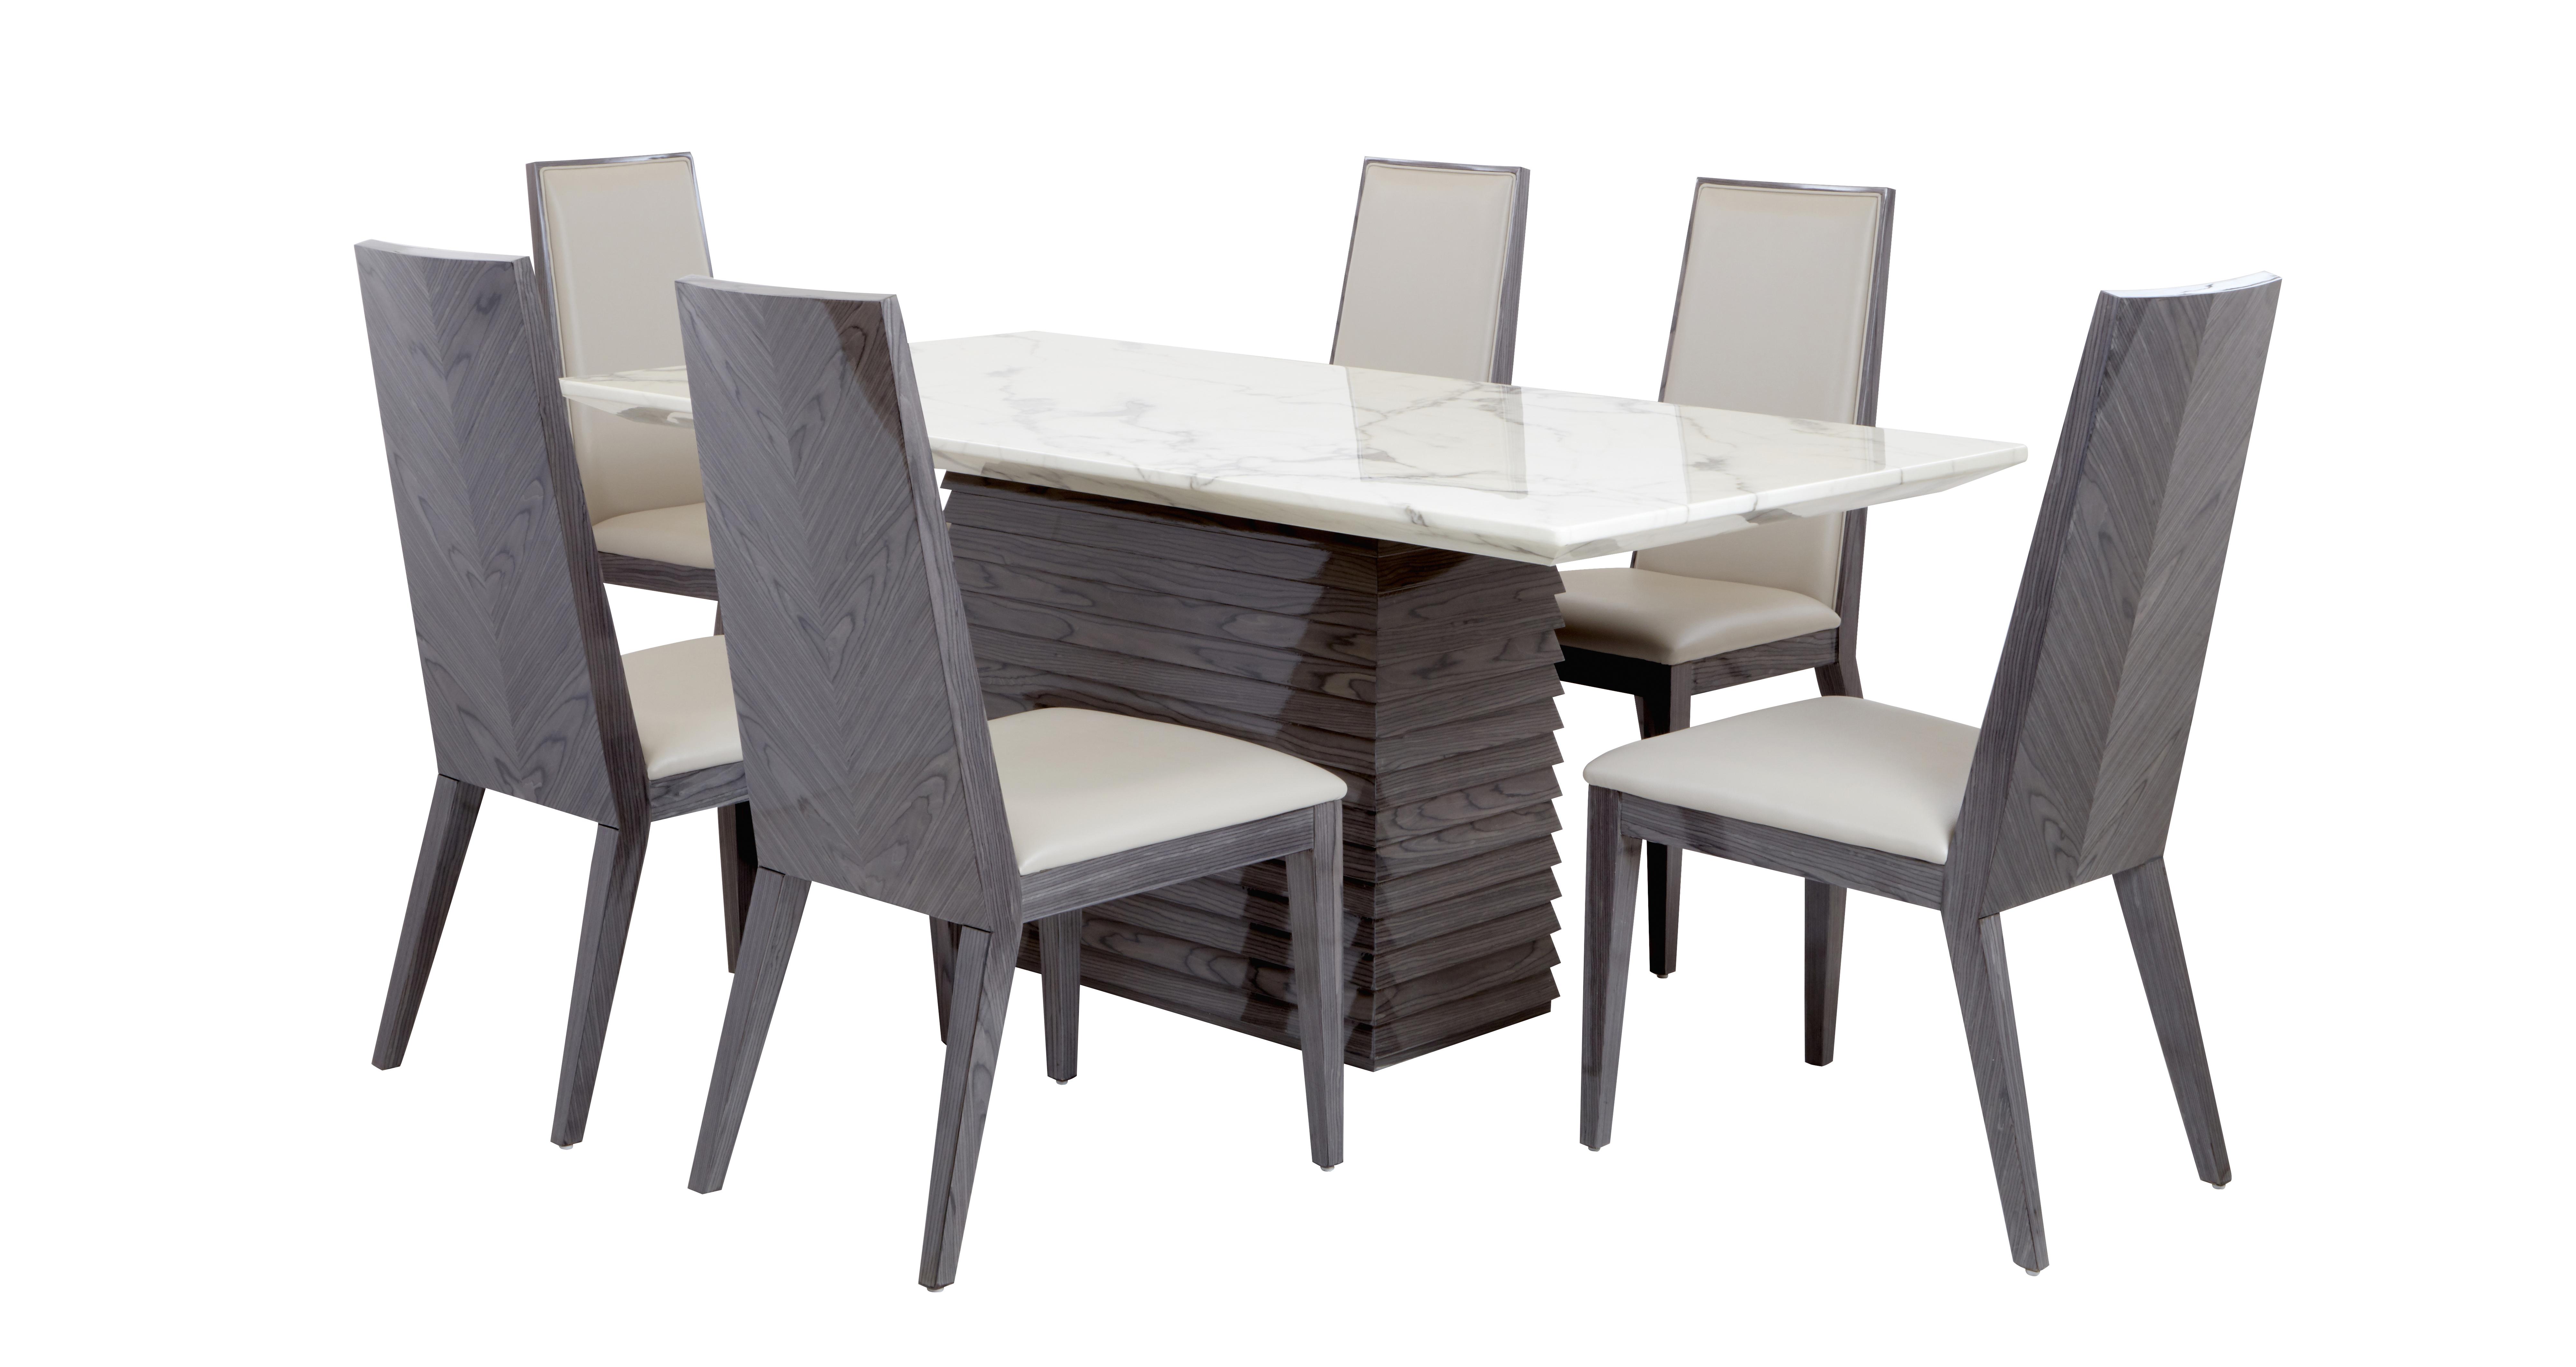 Mara Dining Table Set Of 6 Dining Chairs Dfs